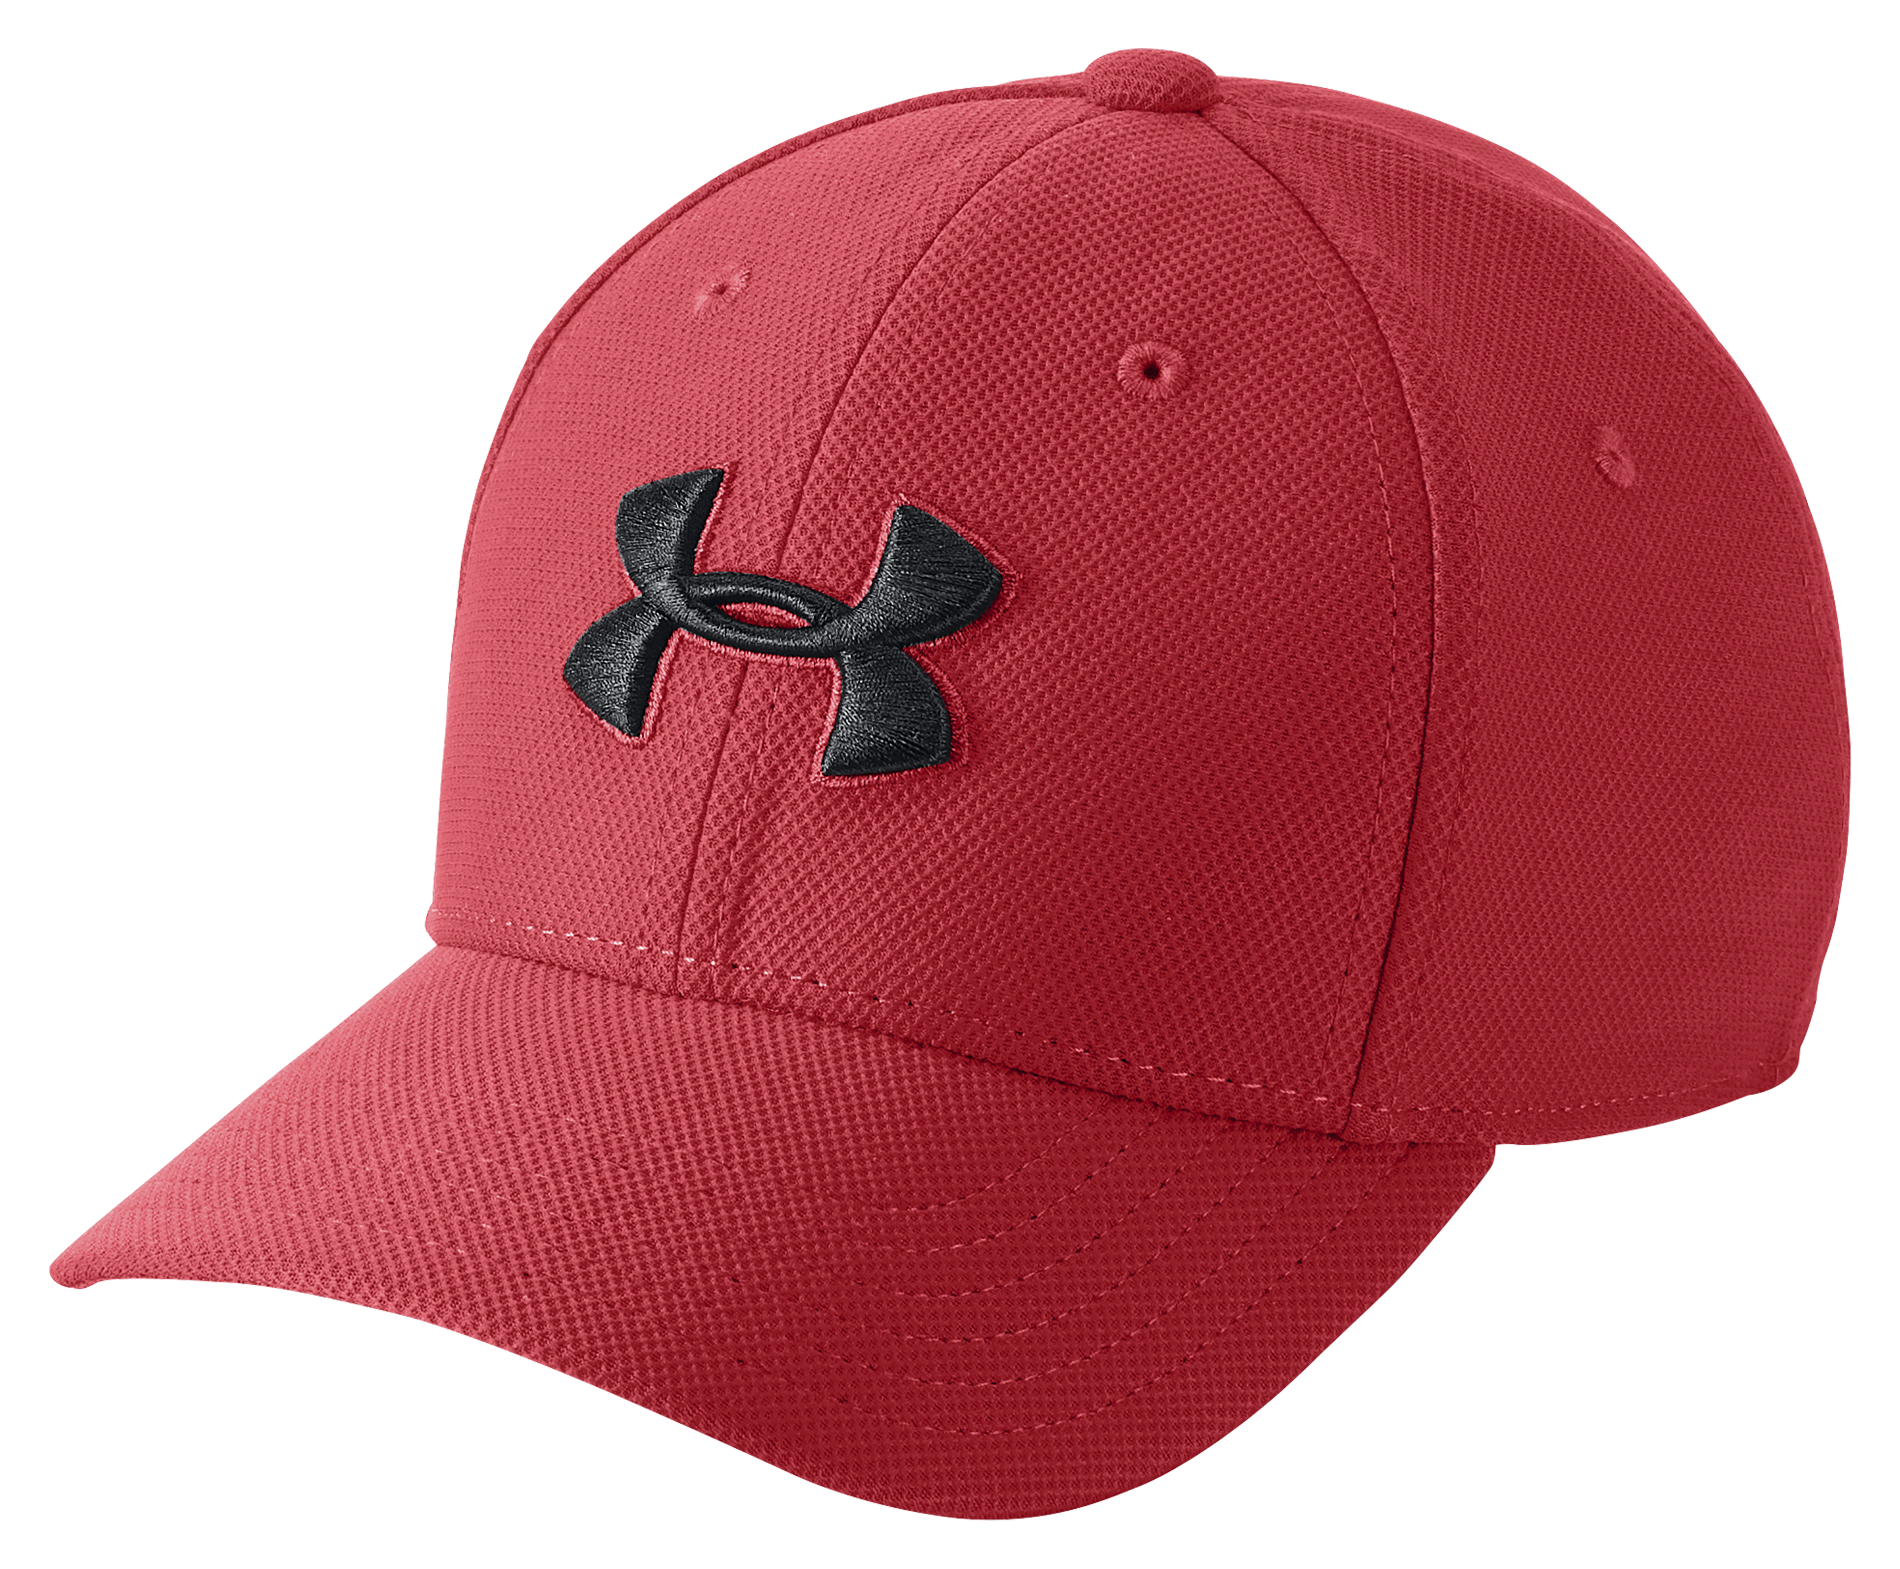 Under Armour - Blitzing Hats with Piping